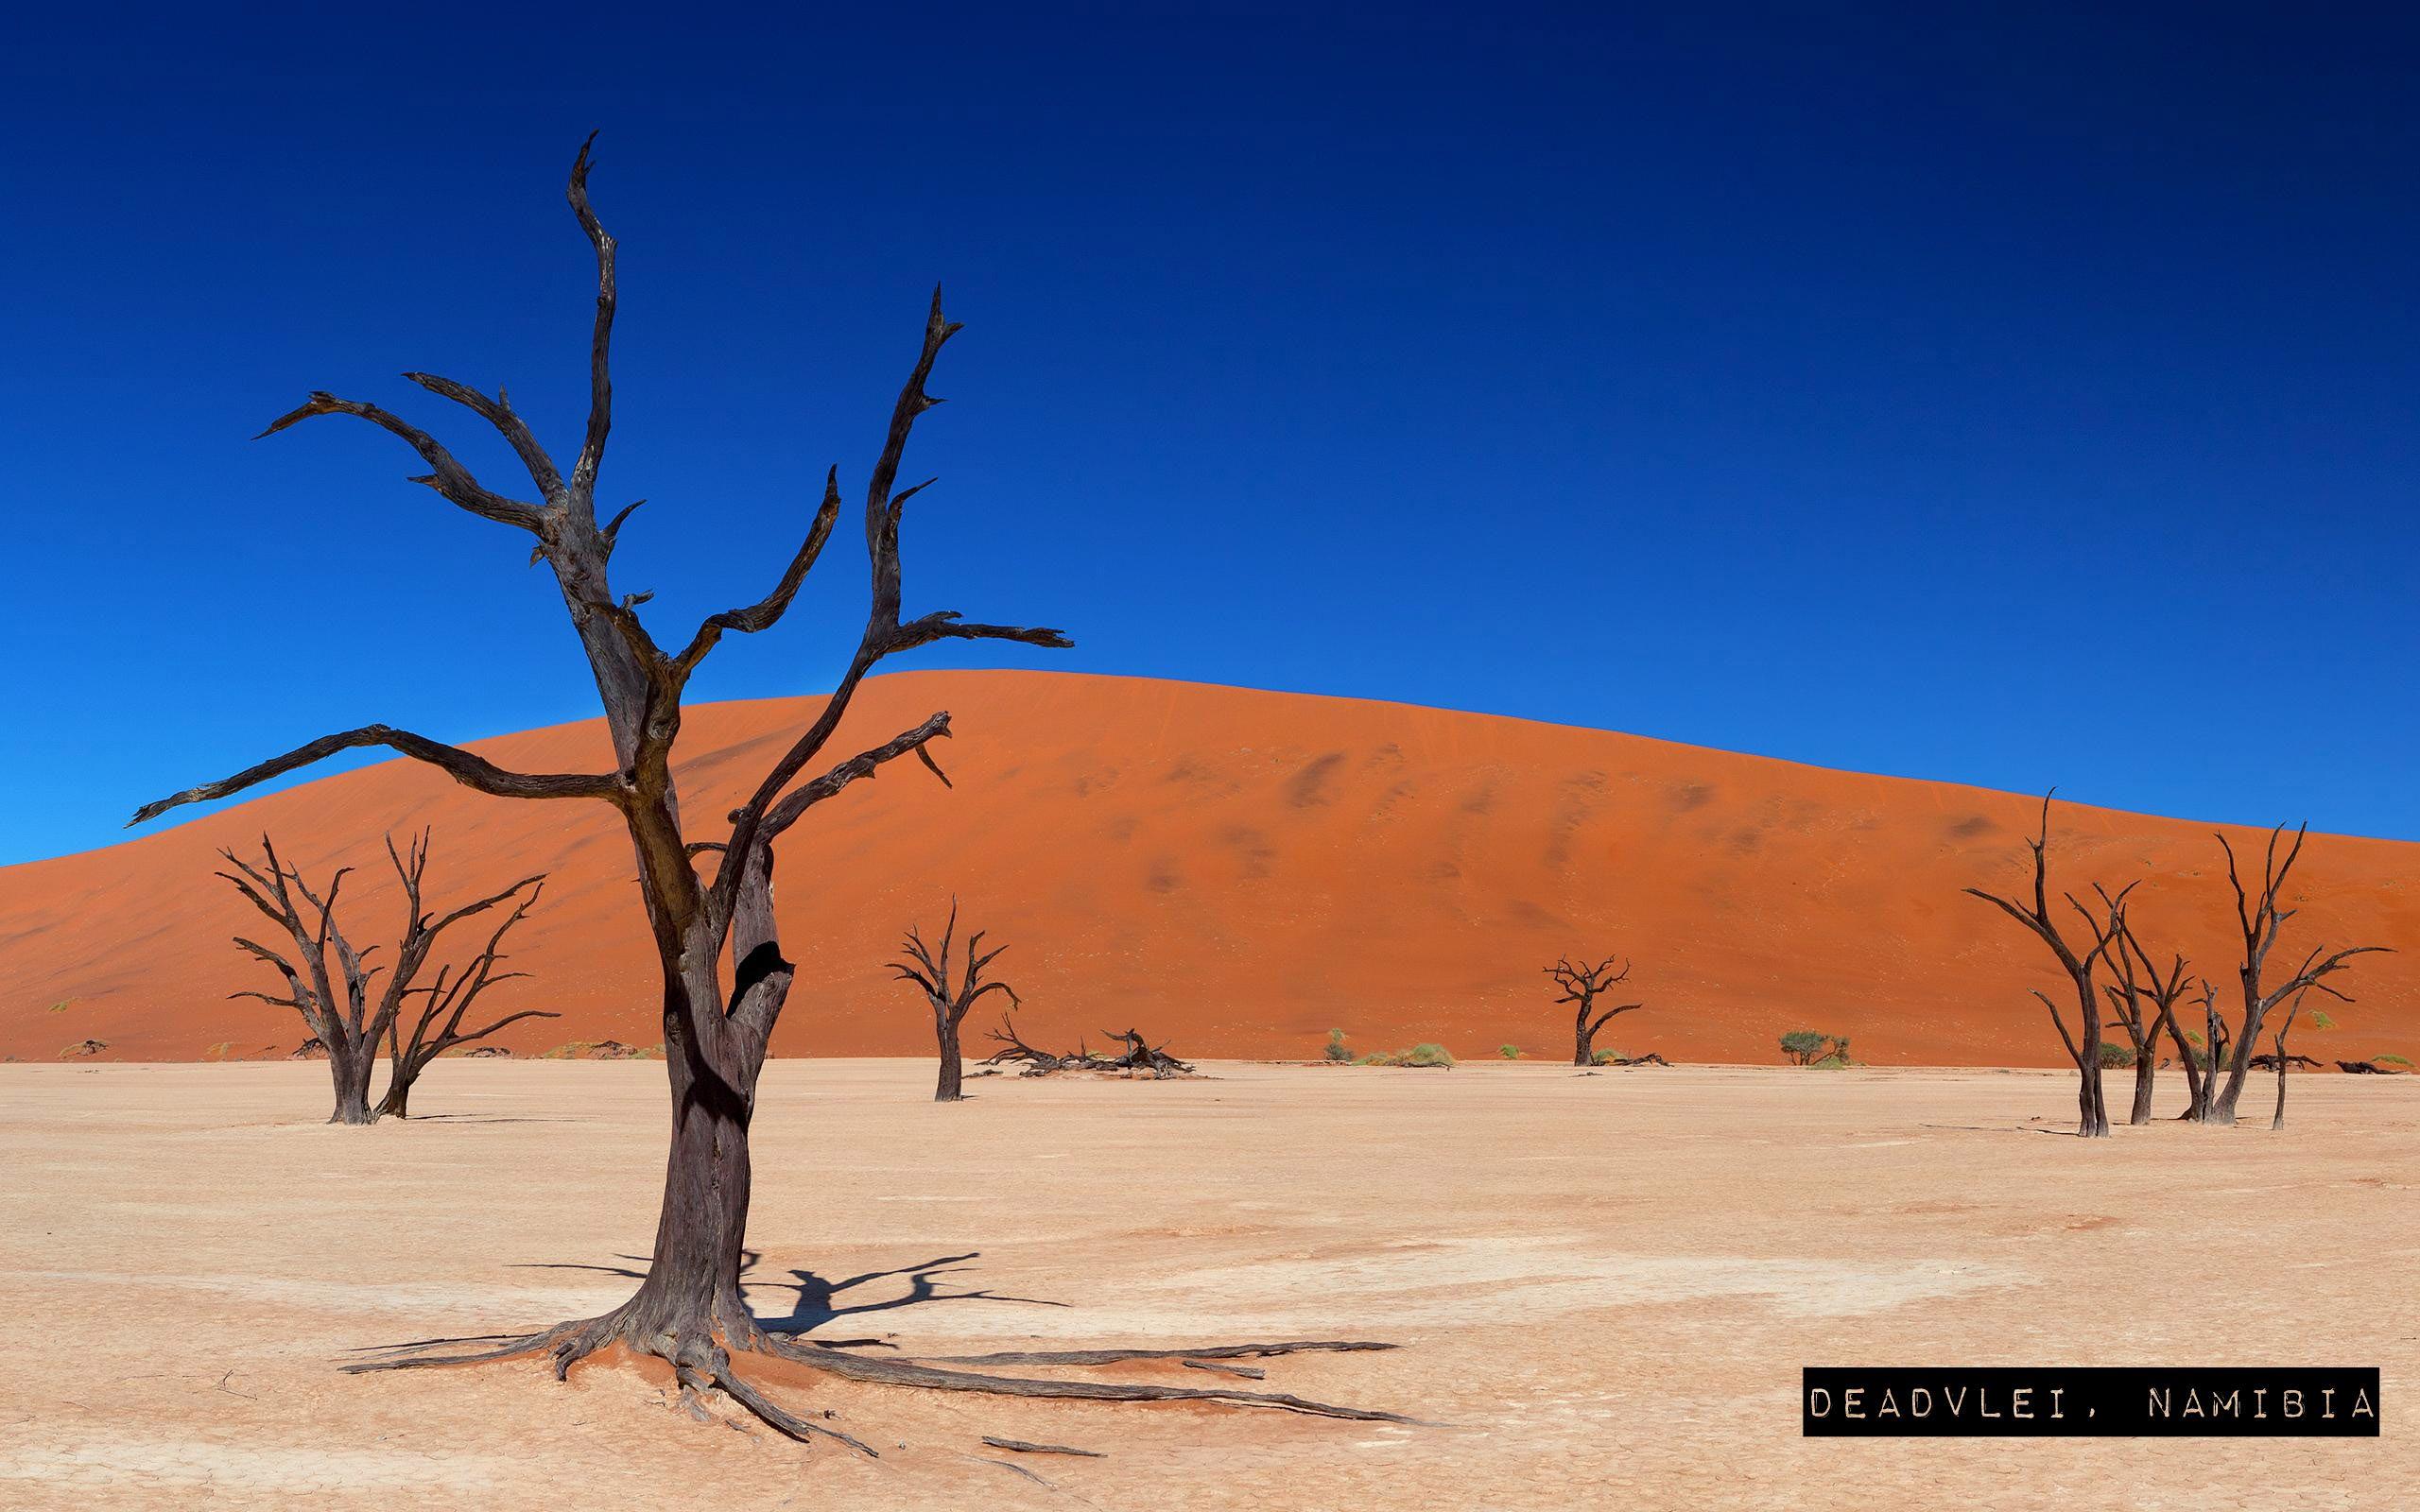 Deadvlei, Namibia places to see before you die. Wallpaper